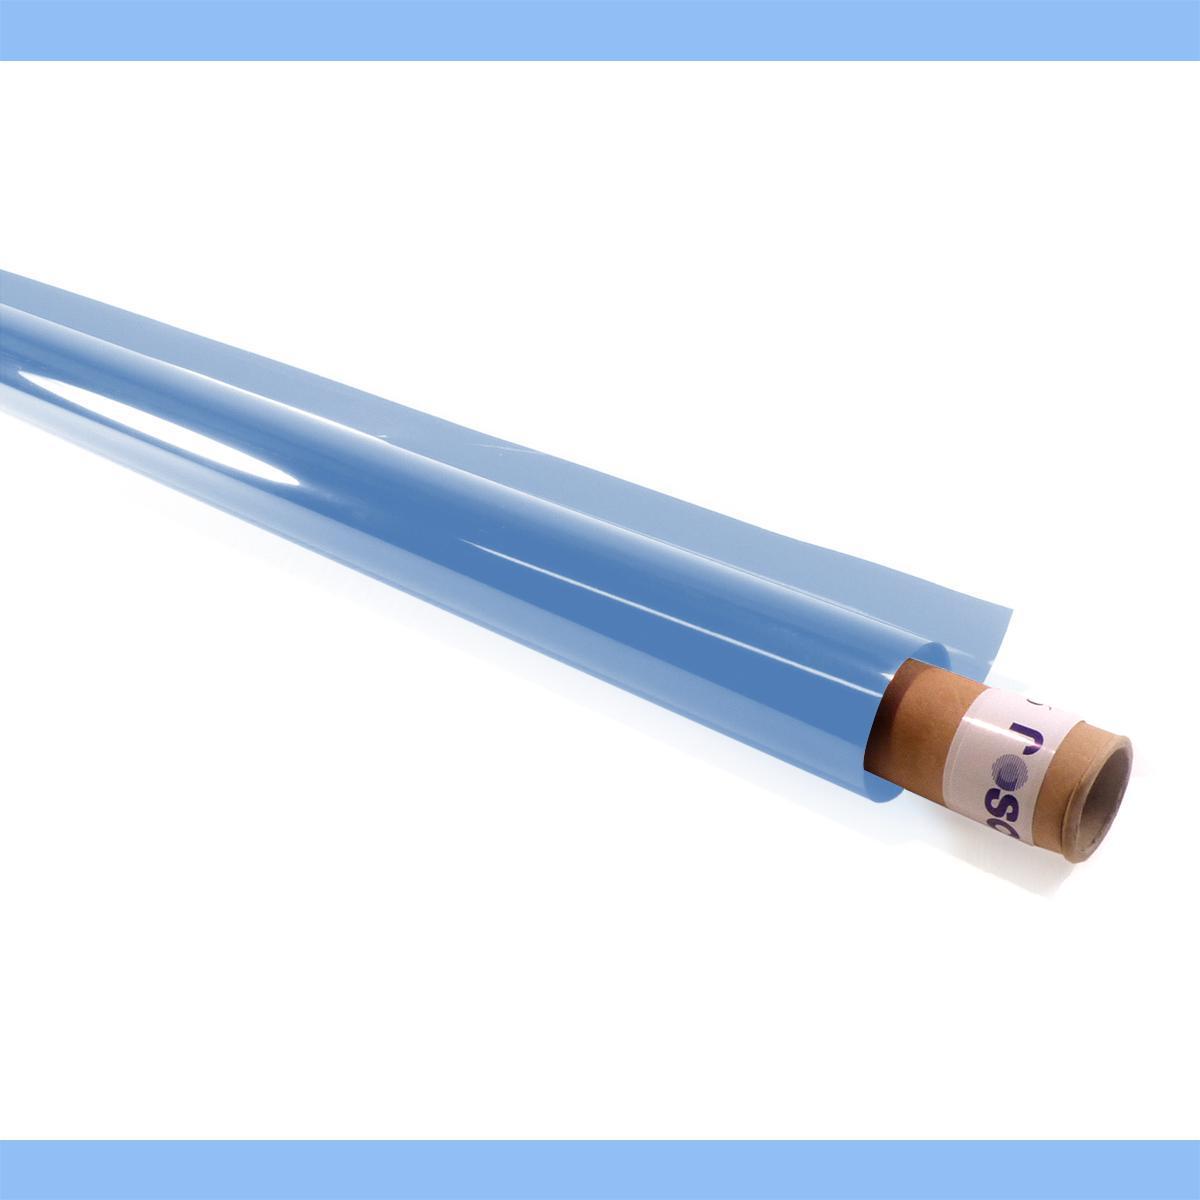 An image of 200 Double C.T. Blue Lighting Gel Roll